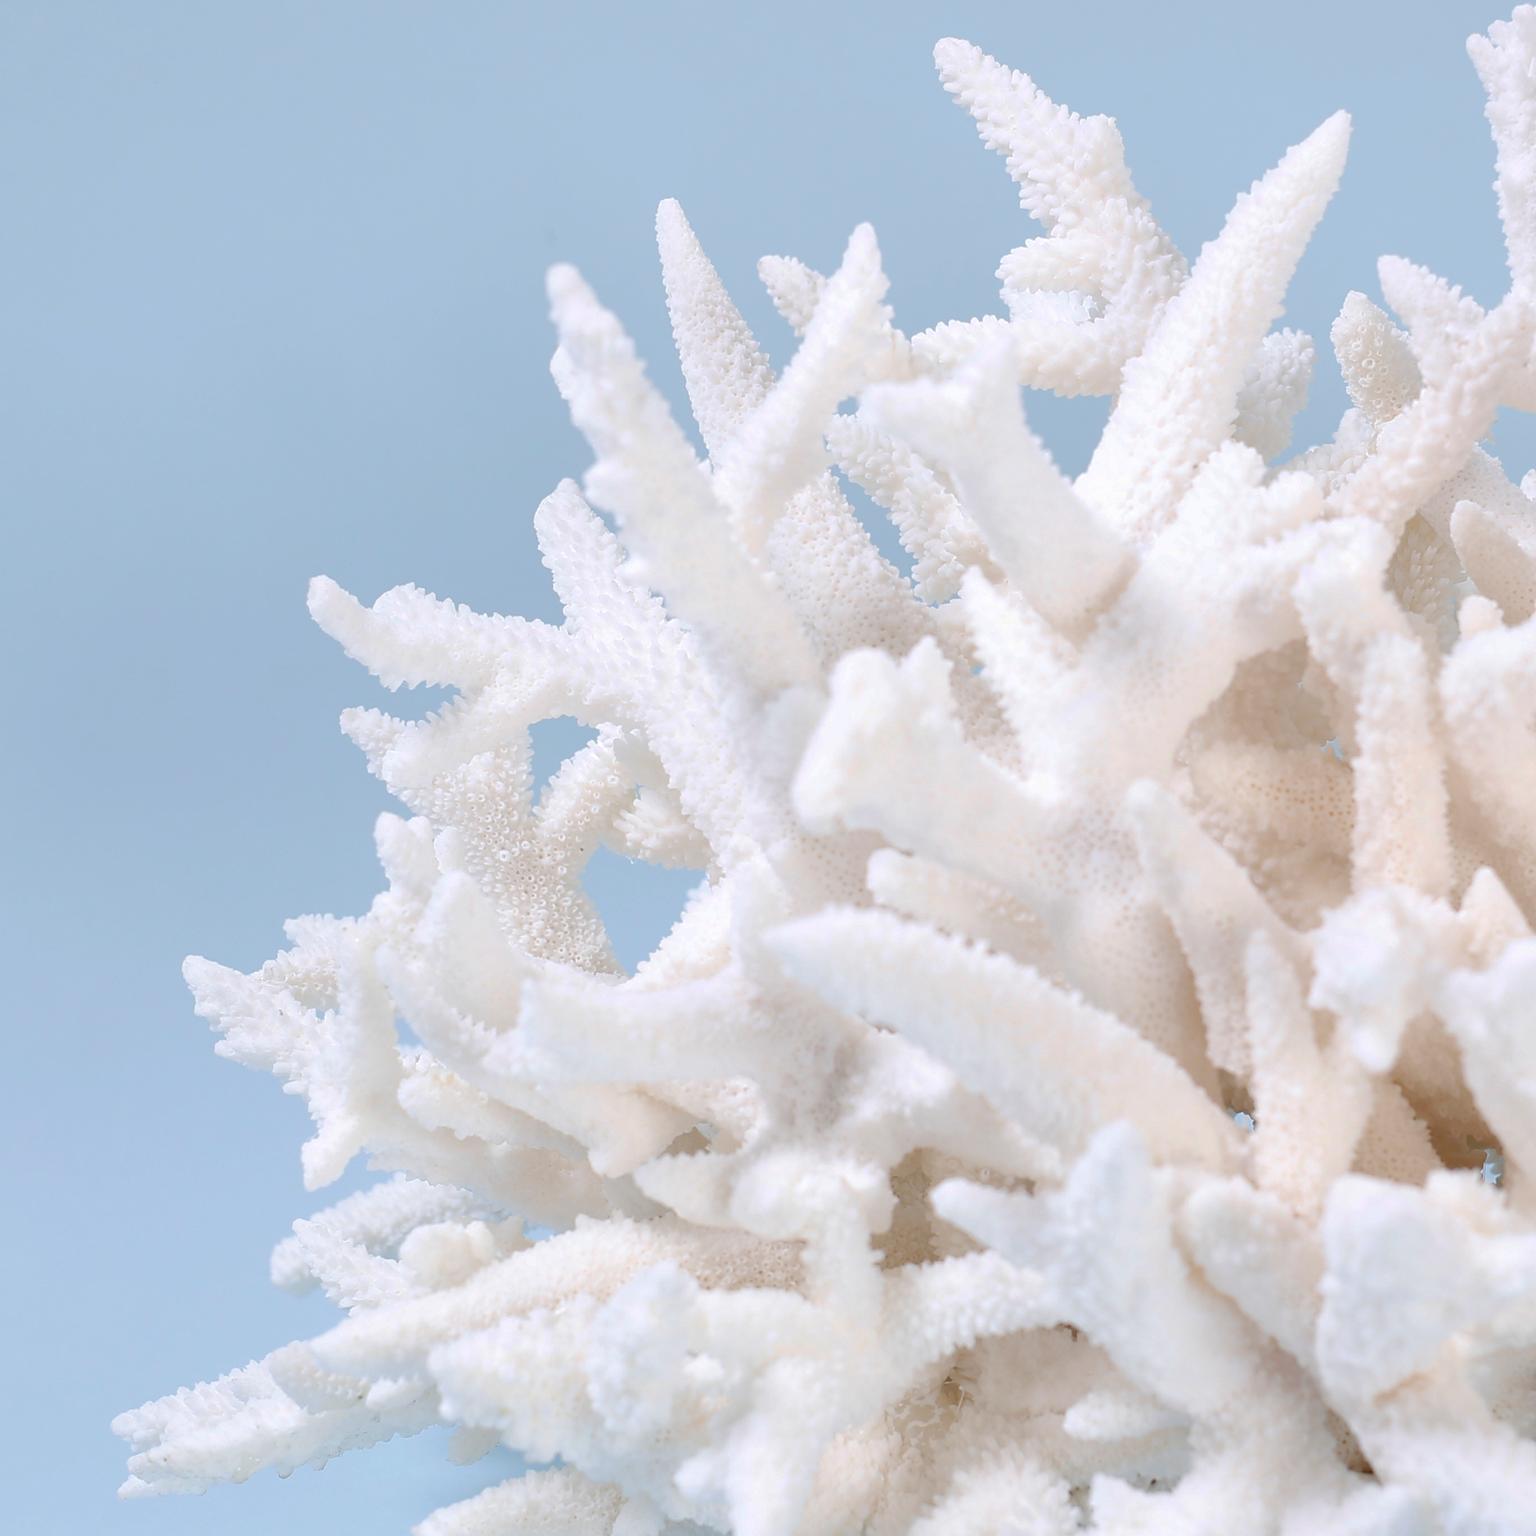 Branch coral sculpture or assemblage with its striking bleached white color and sea inspired form and texture, designed and crafted by FS Henemader. Presented on a Lucite base.